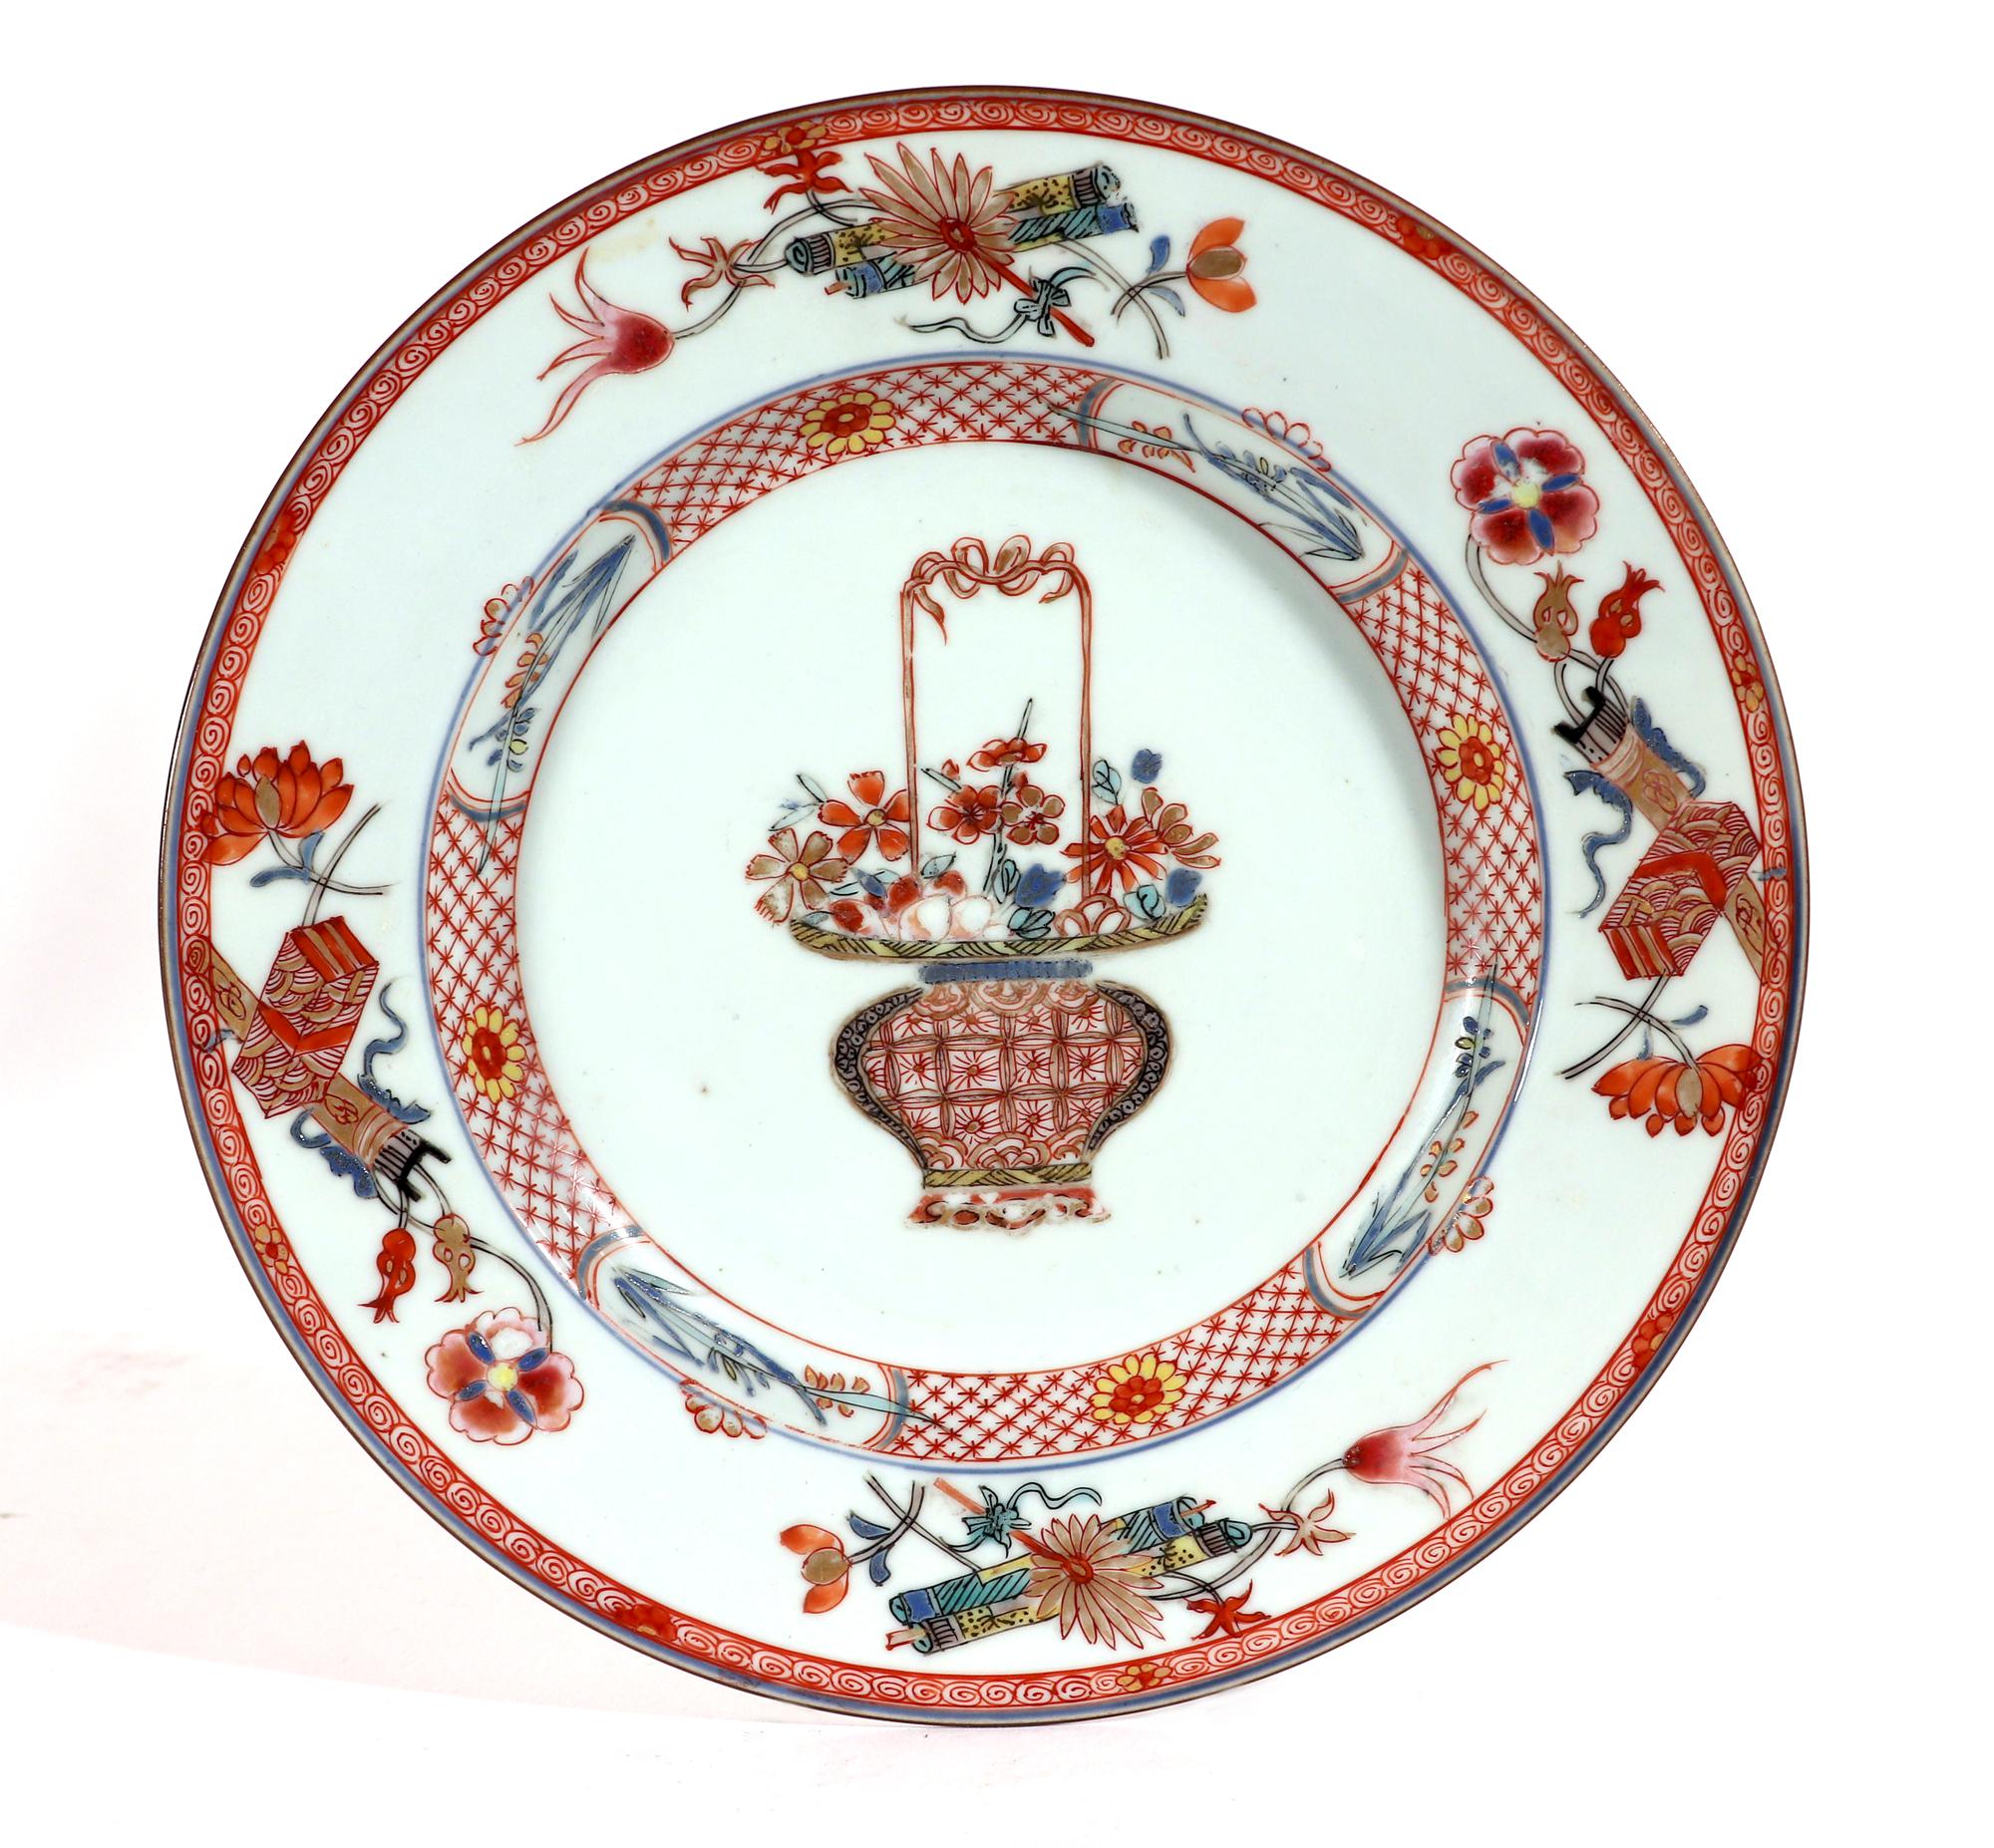 Chinese Export Porcelain Famille Rose-Verte Plates Painted with A Flower Basket In Good Condition For Sale In Downingtown, PA